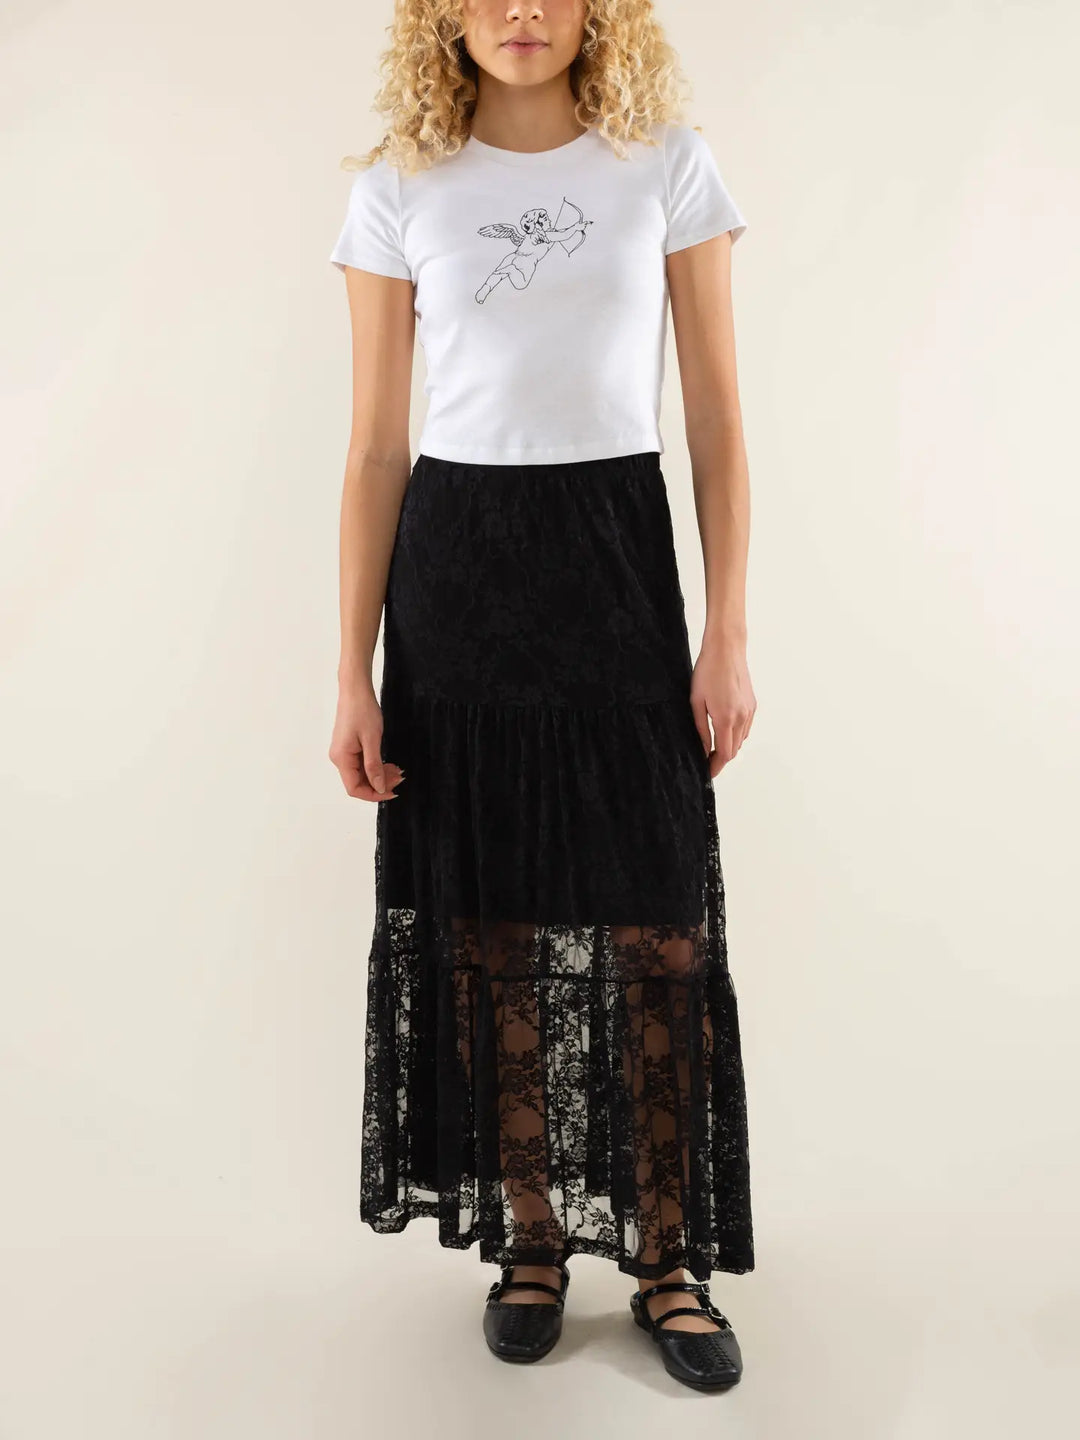 Floral Lace Skirt